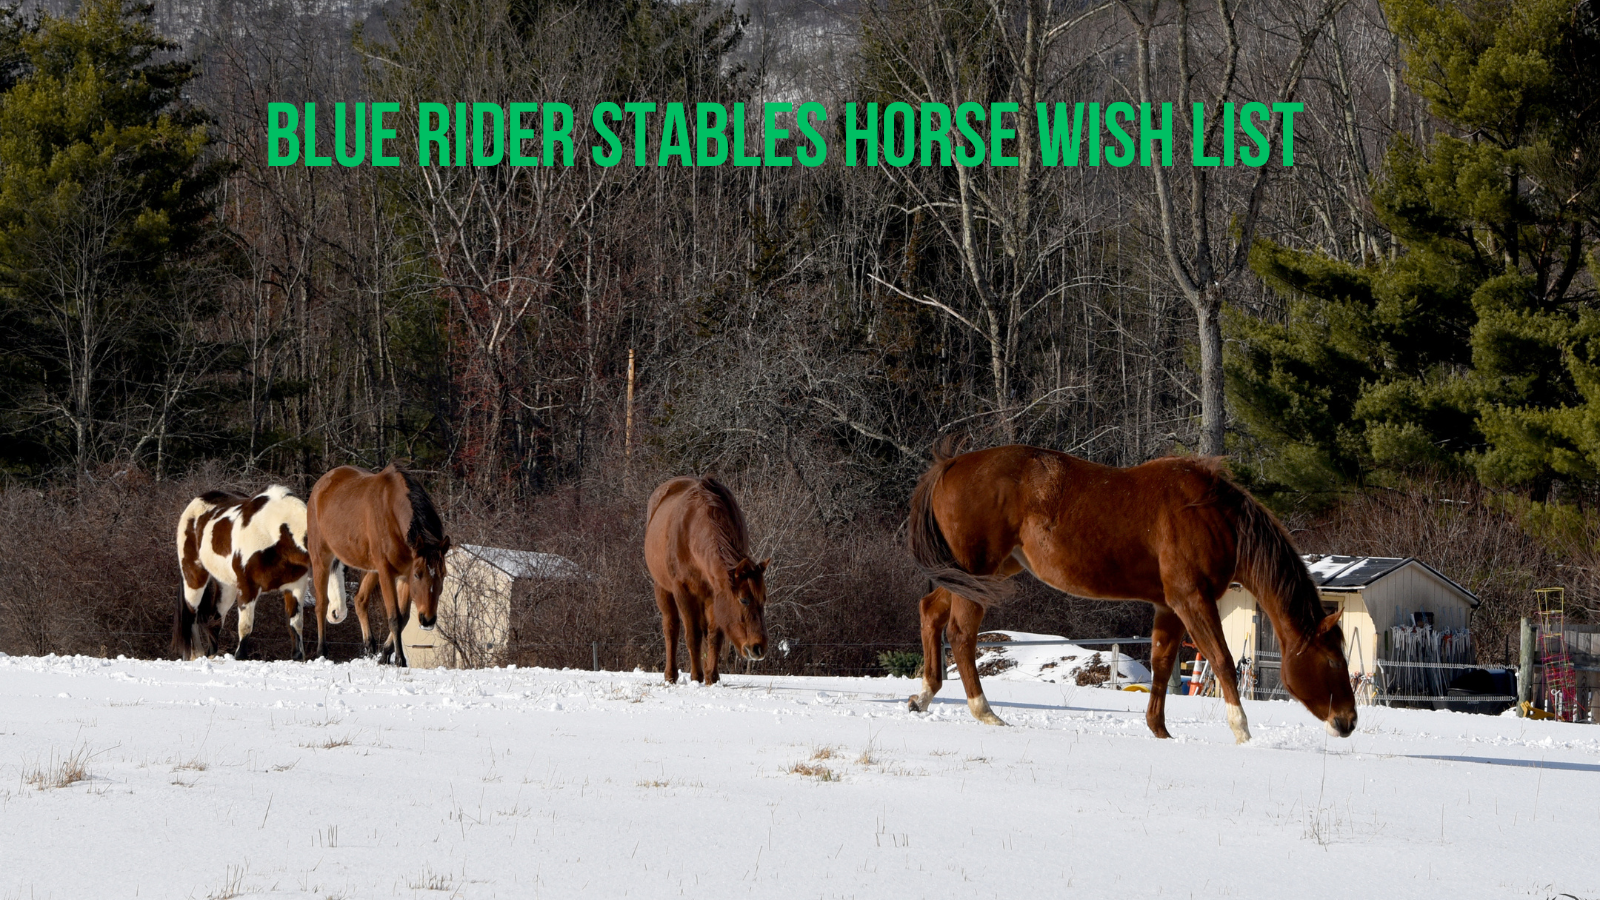 Blue Rider Stables Horse’s Wish List